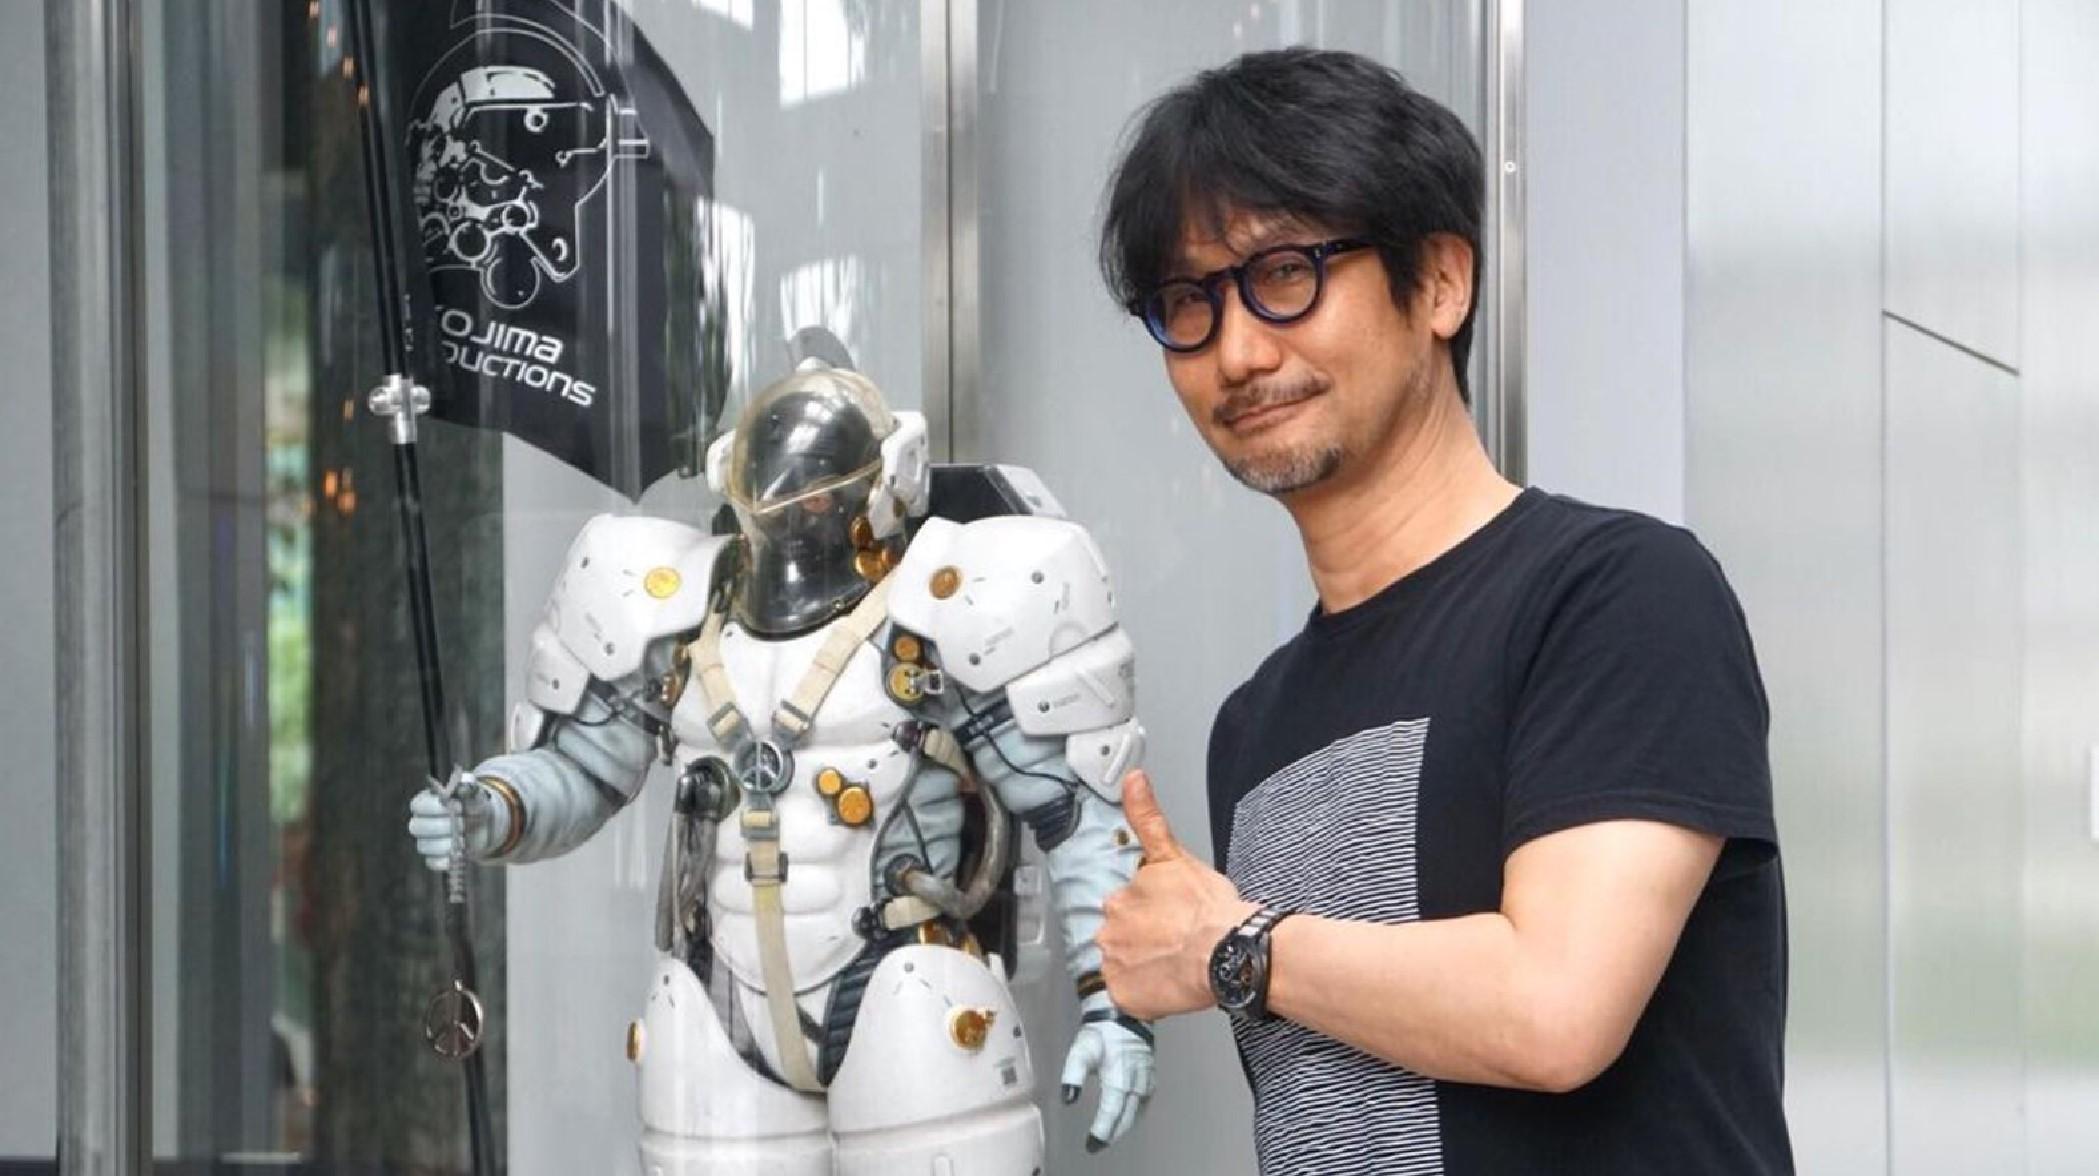 Hideo Kojima has revealed another actor for his next game